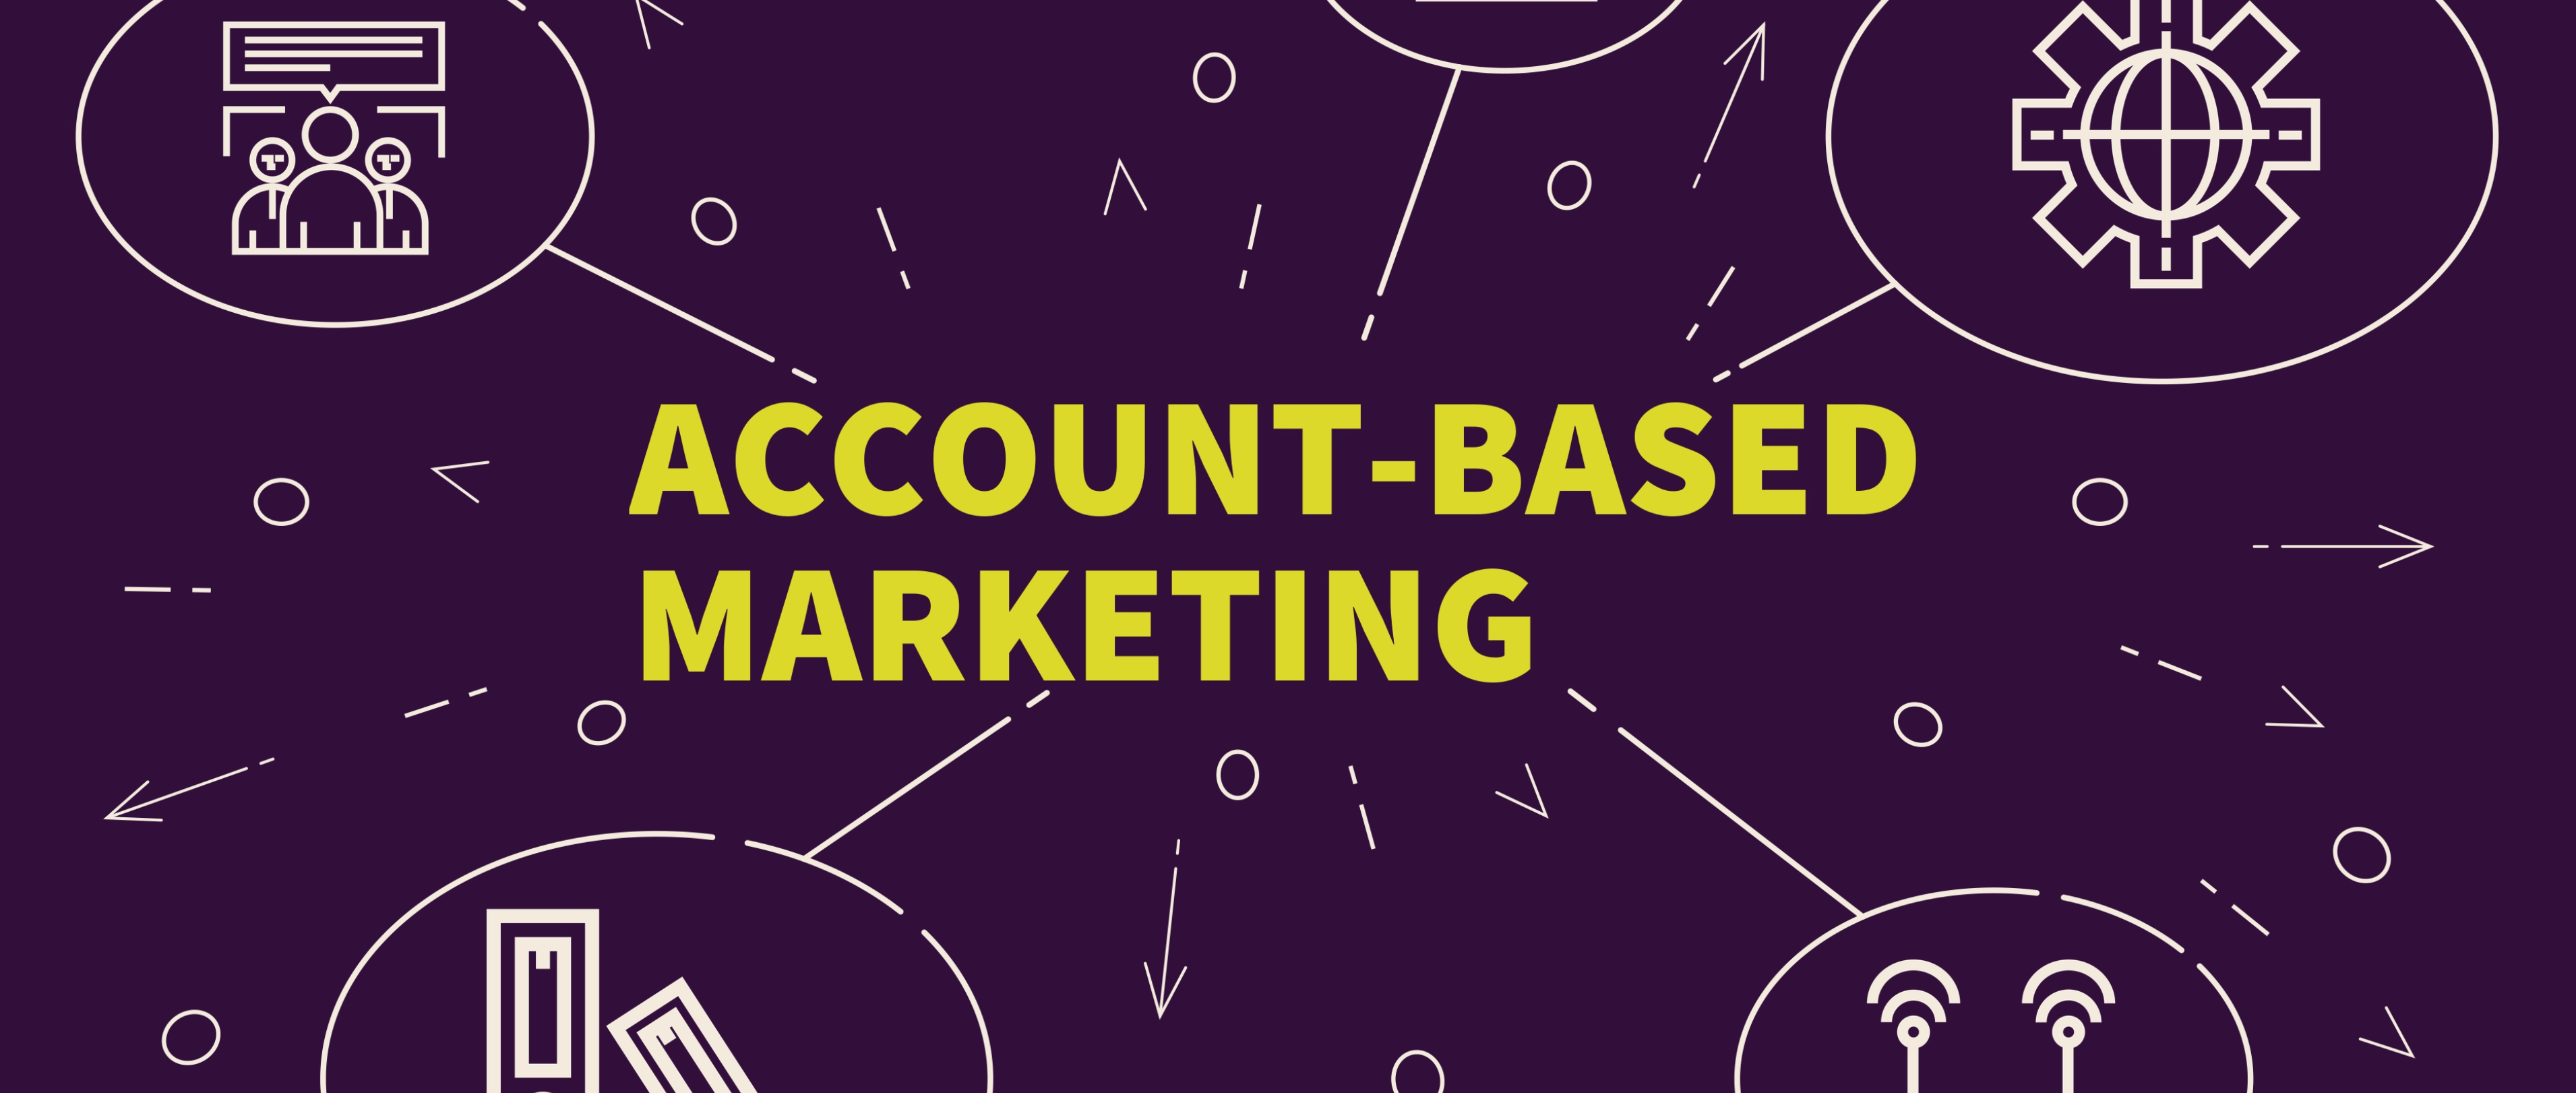 Article tells the Account Based Marketing (ABM) Rules